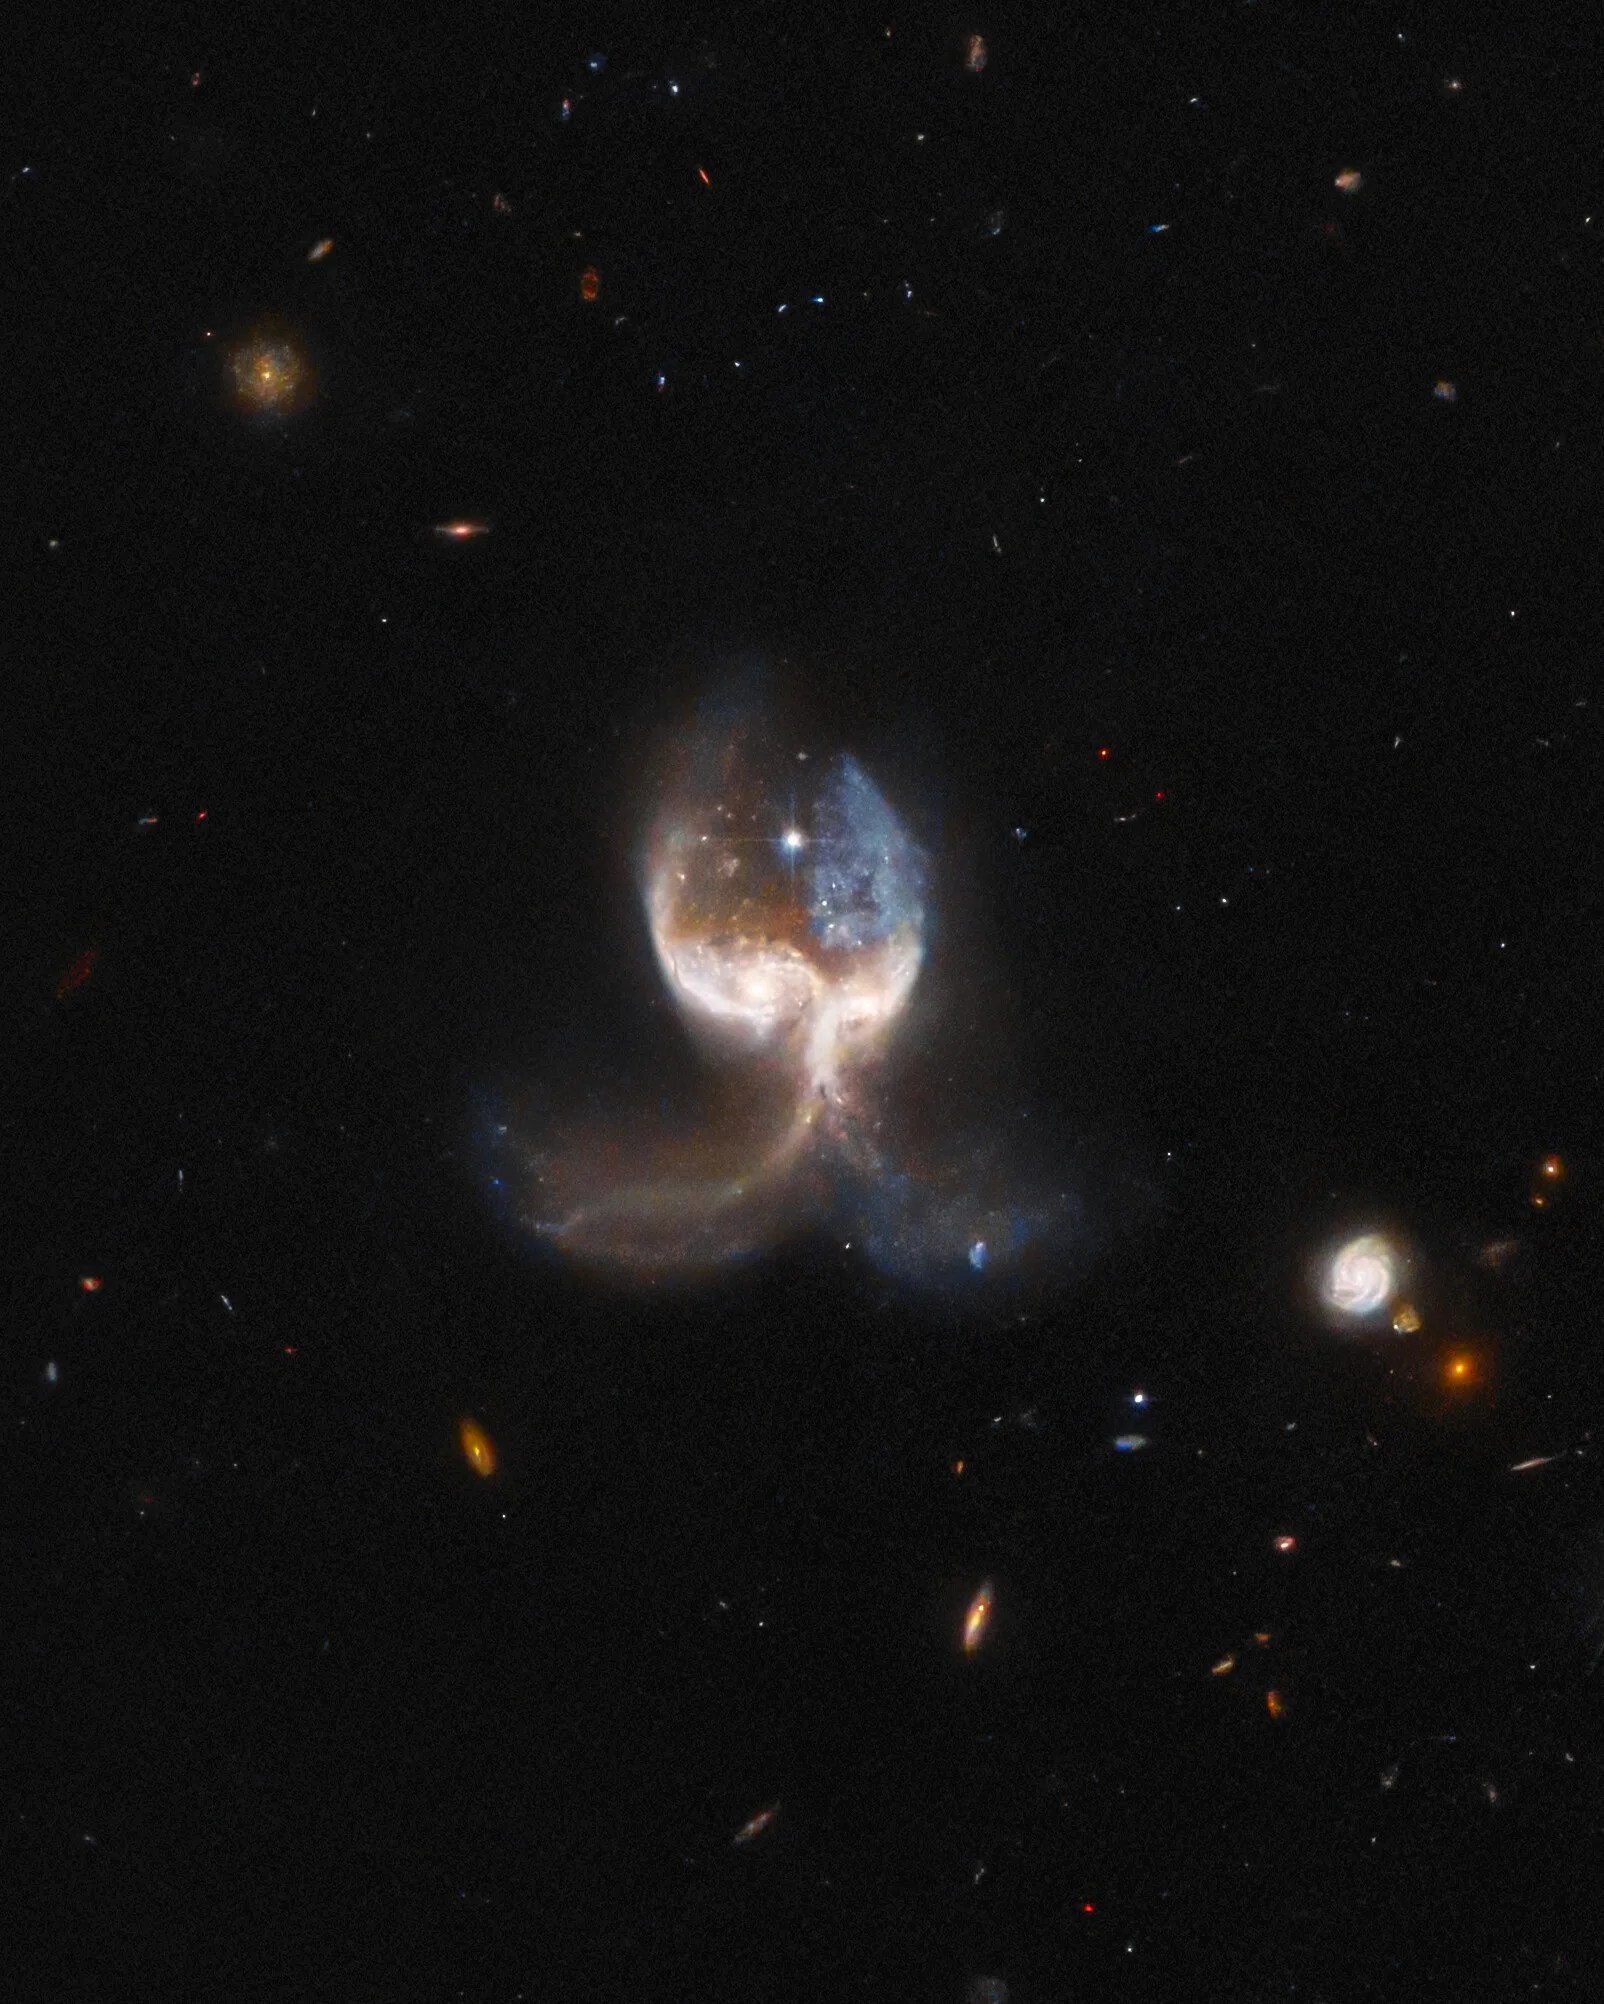 2 merging galaxies at image center form what looks like an angel with large wings. distant galaxies dot the background